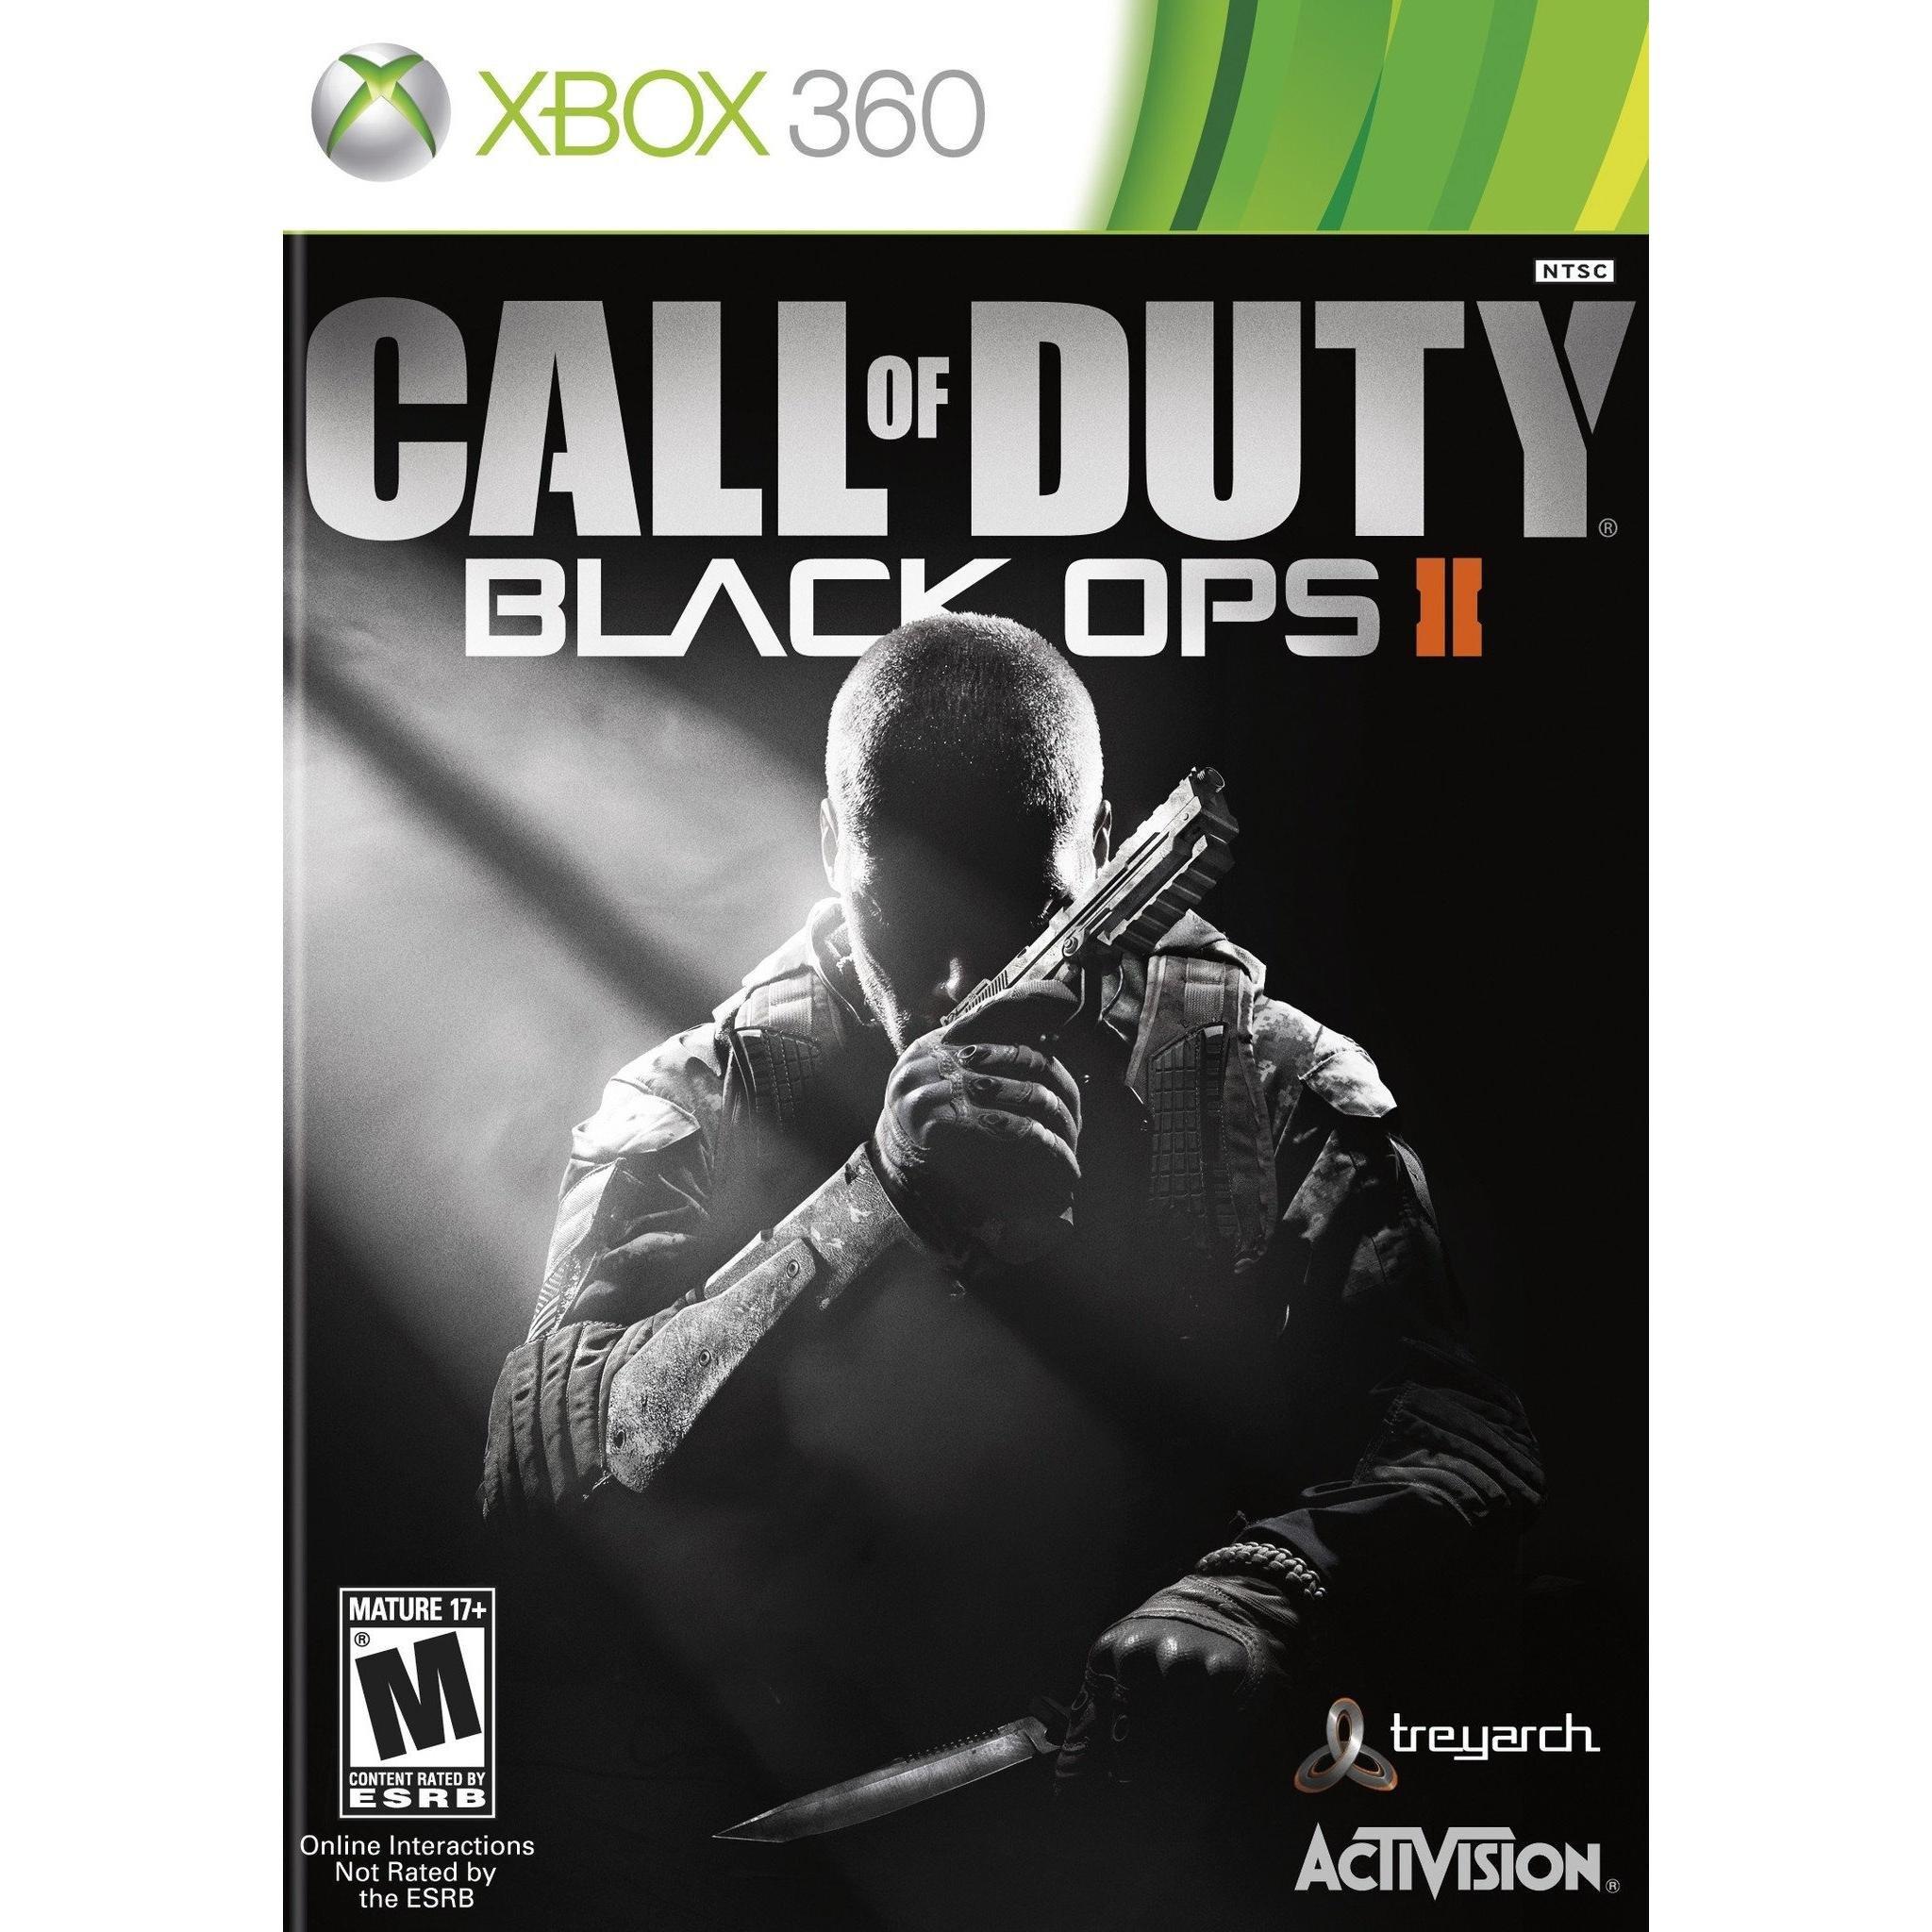 call of duty black ops 2 xbox one s